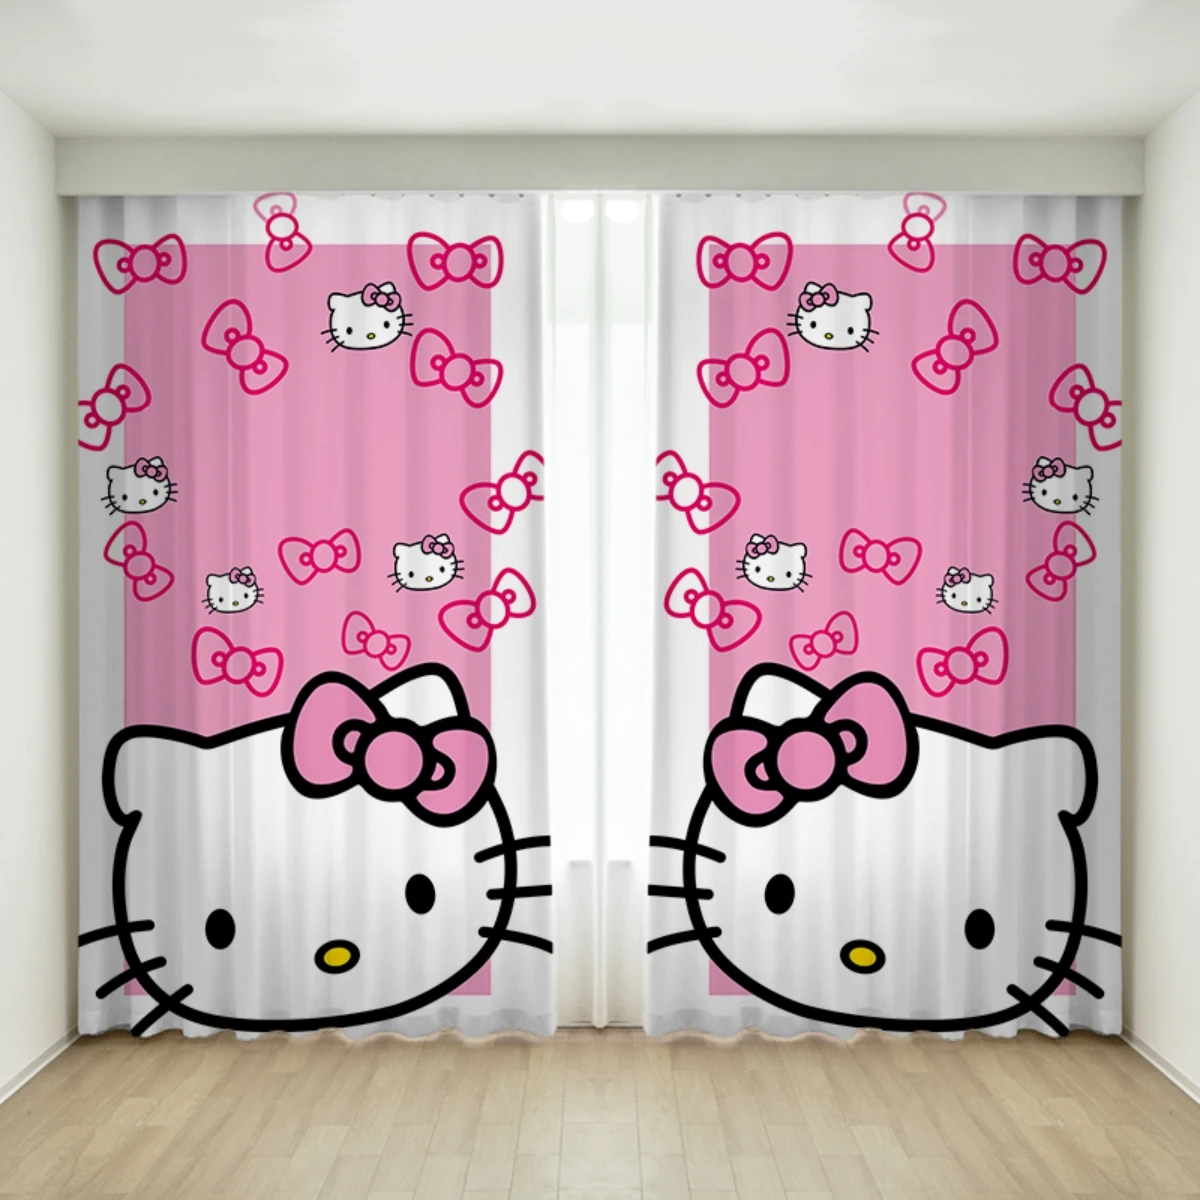 

2panels Curtains Rainbow Cat Pink Printed Translucent Curtains Sun Privacy Protection Curtains Living Room Bedroom Decor